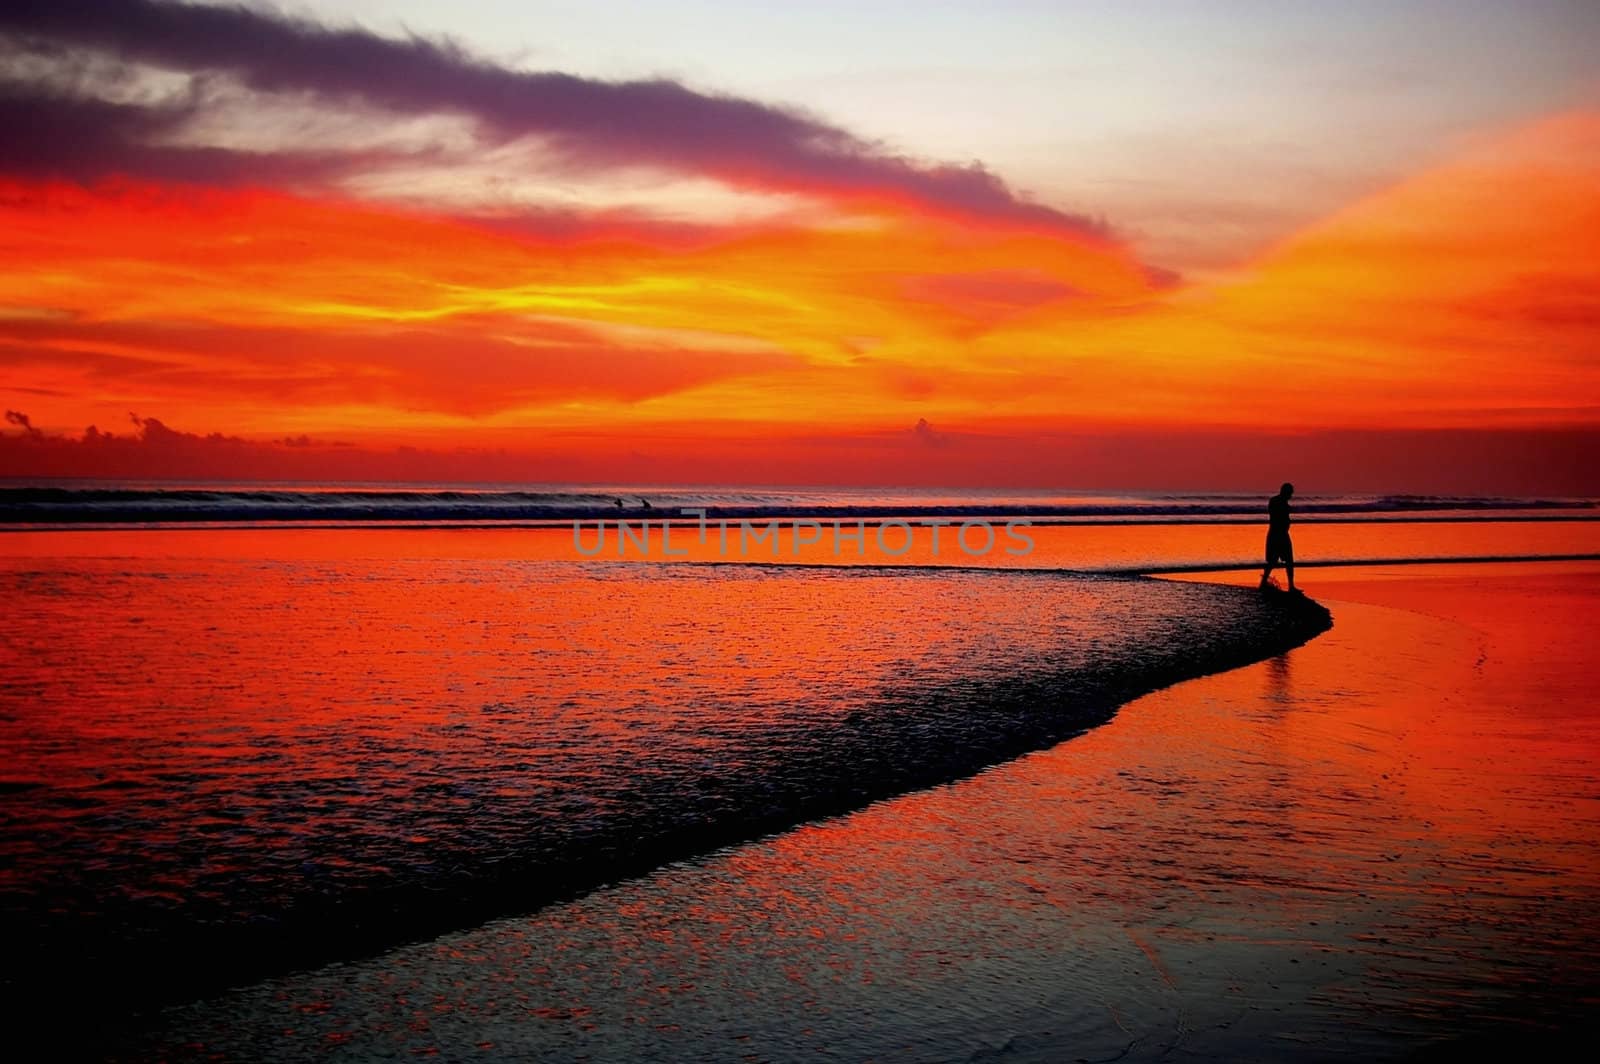 Silhouette of man in distance walking on beach at sunset, Bali.